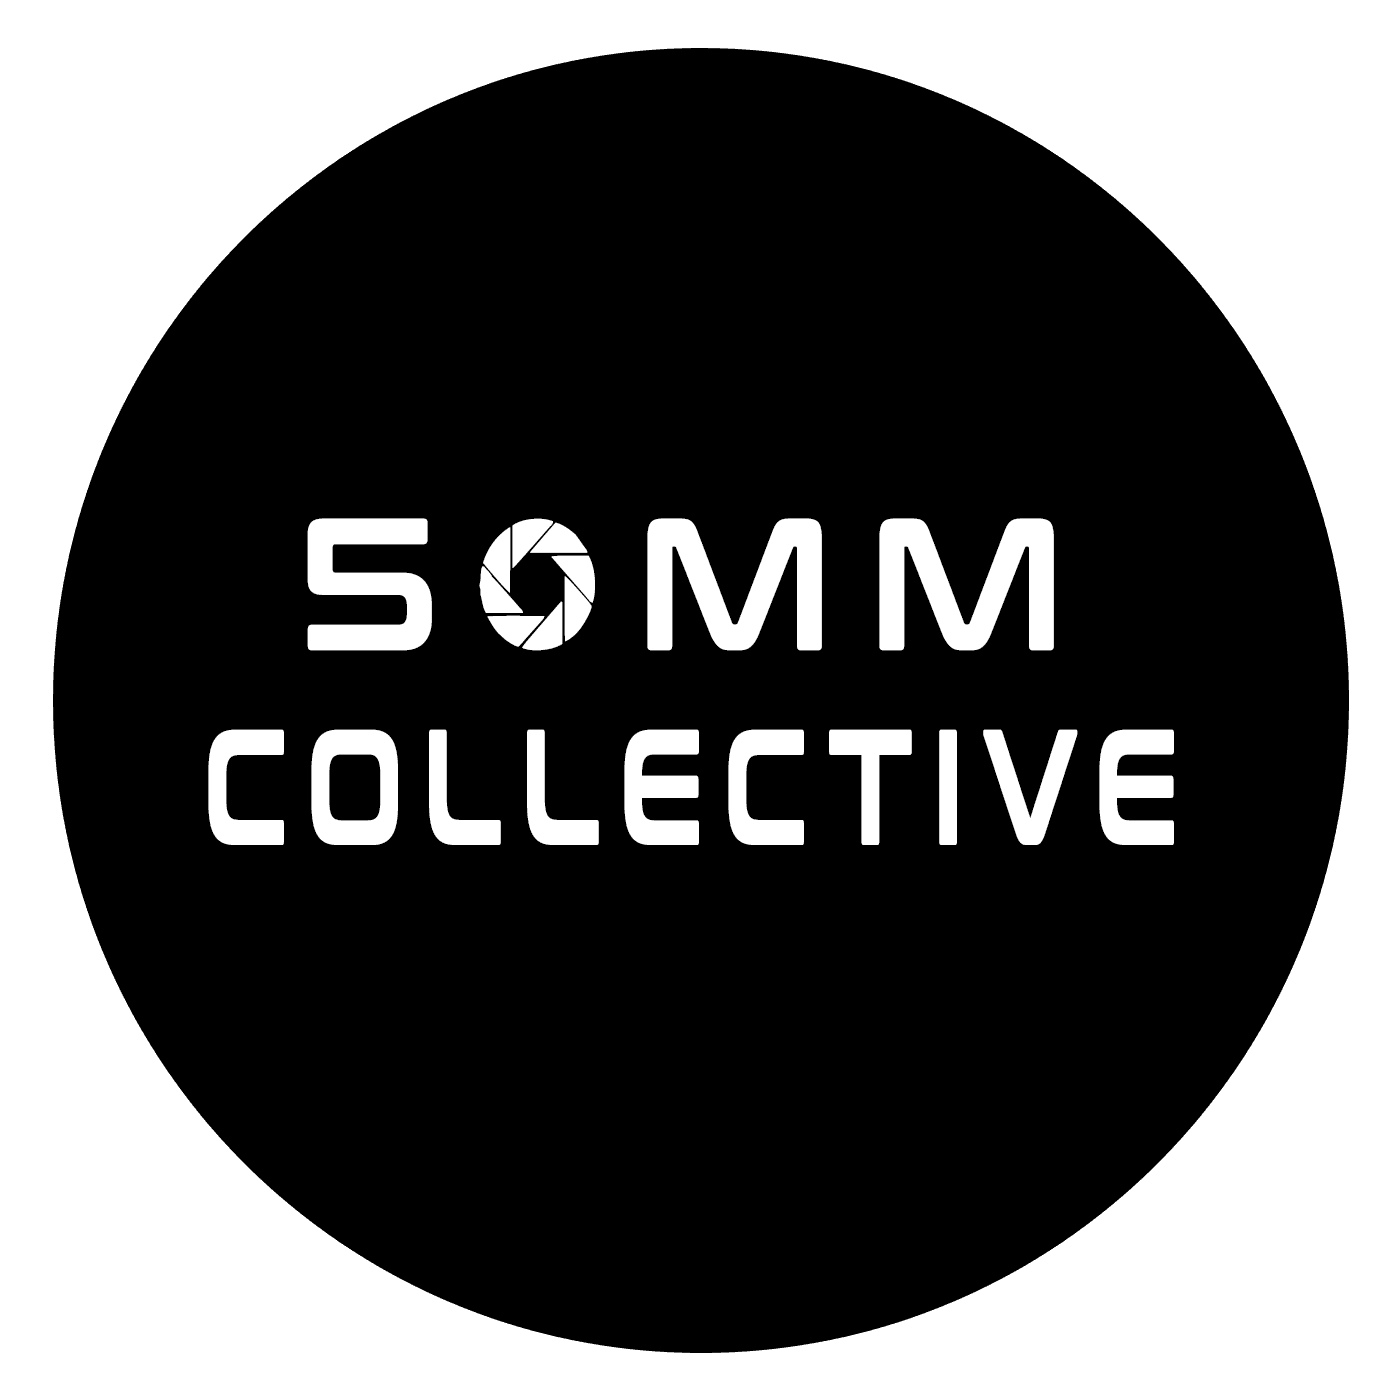 50mmcollectivevault.eth